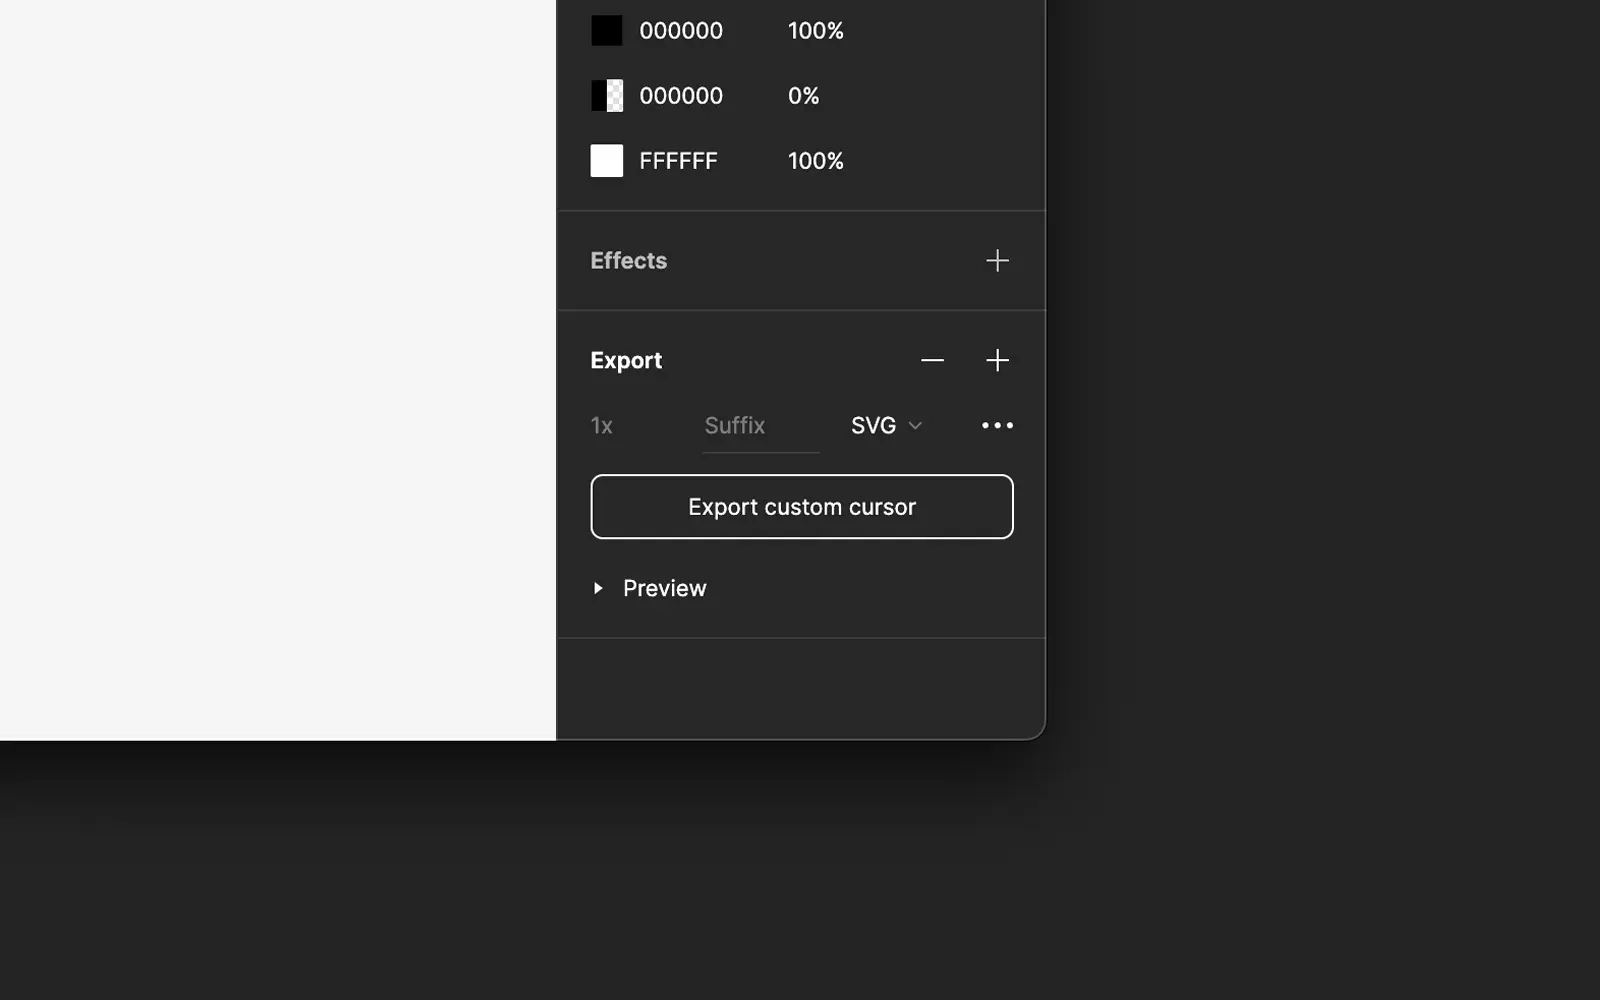 Exporting an asset from Figma